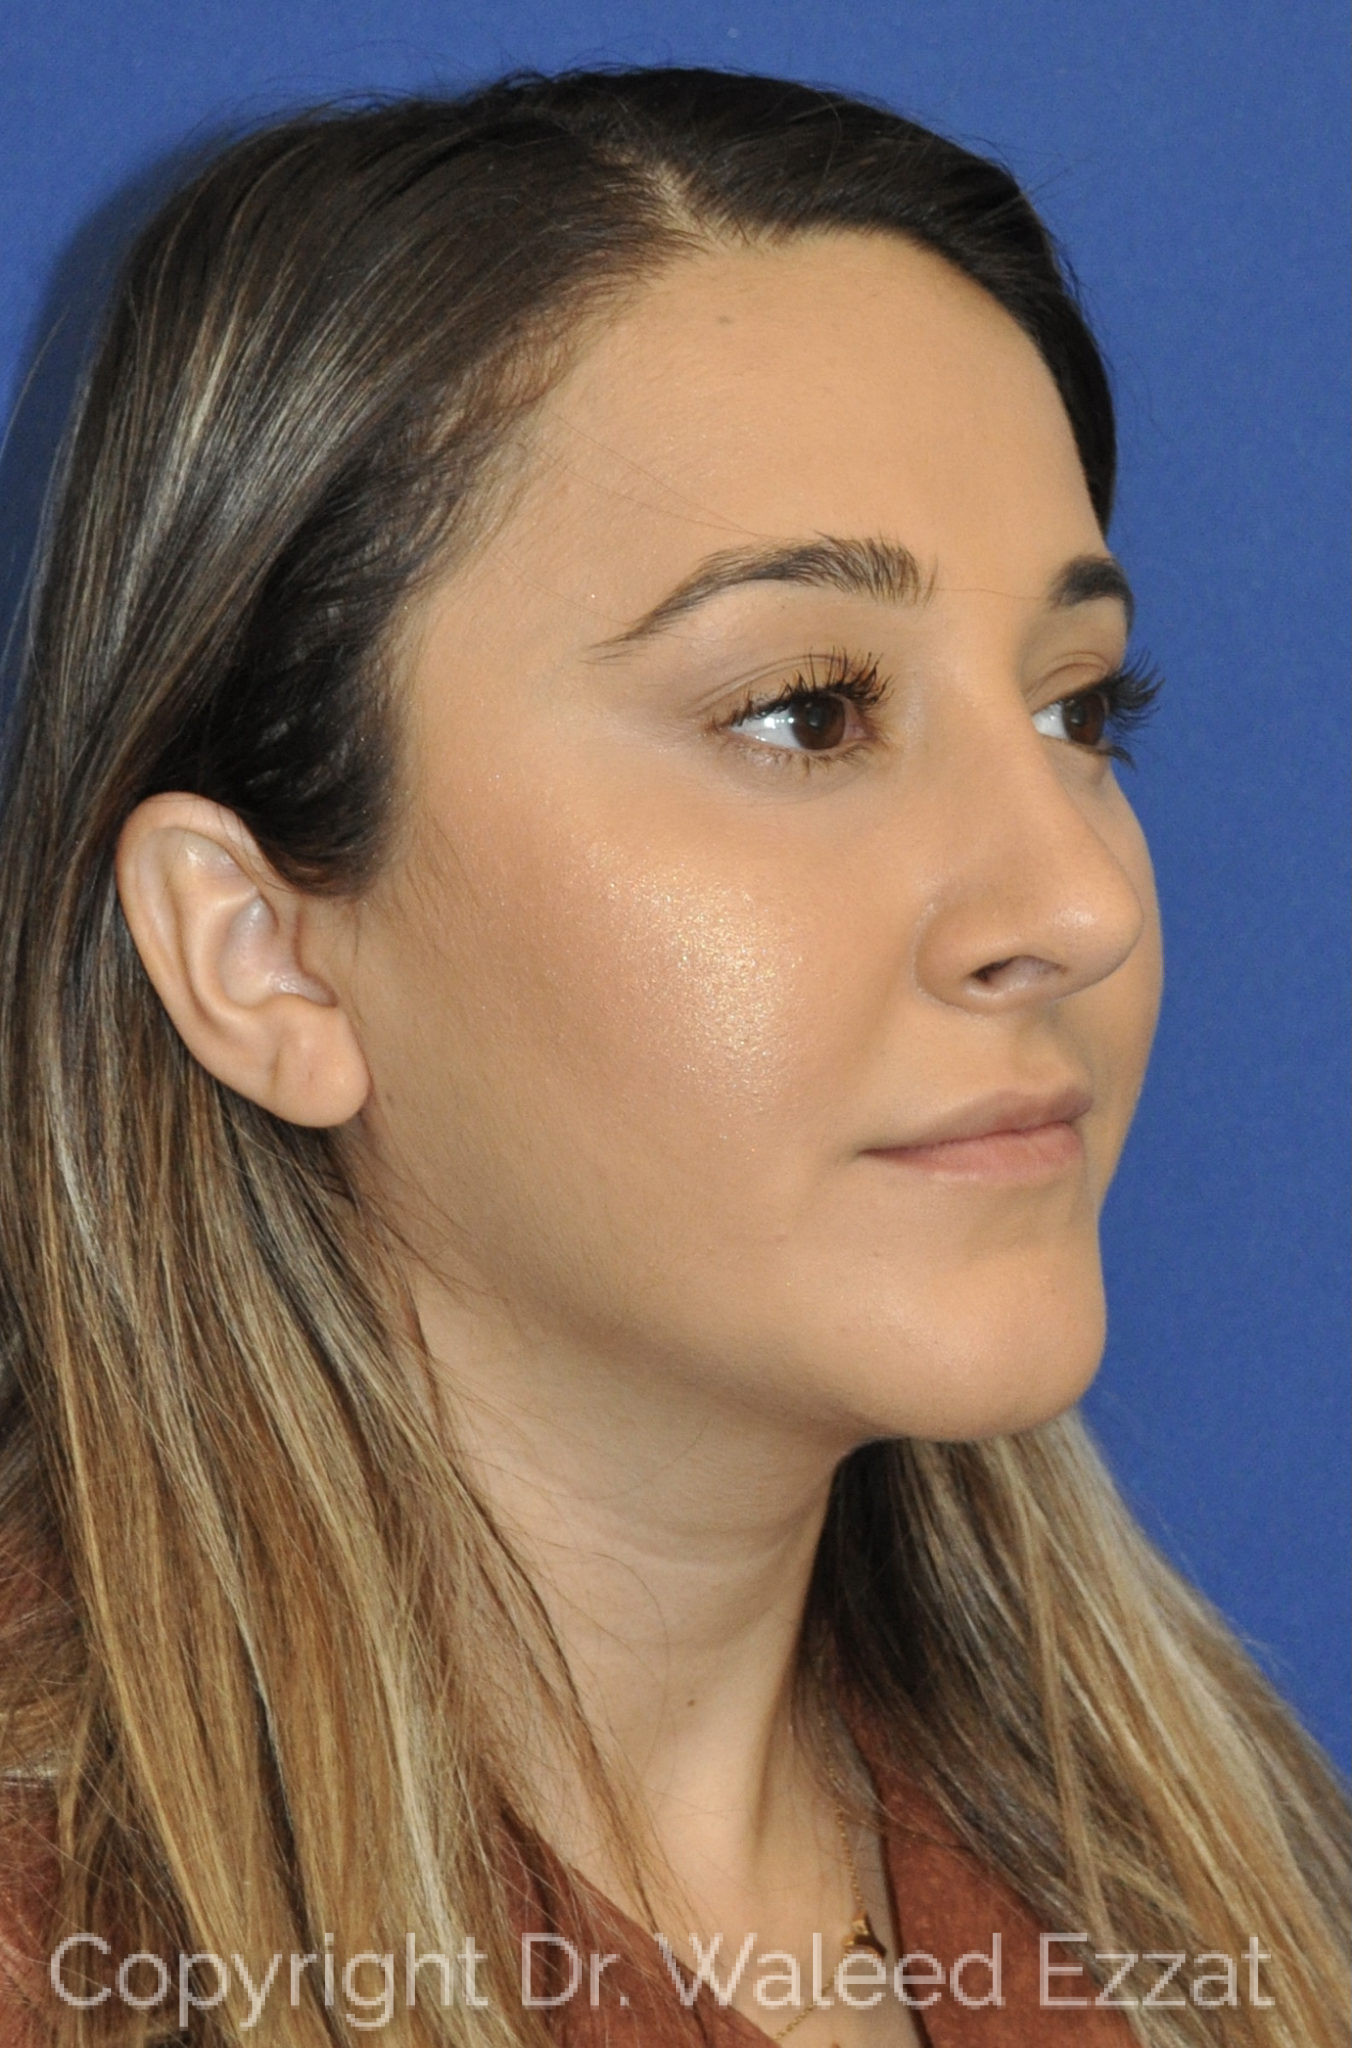 Hispanic/South American Rhinoplasty Patient Photo - Case 31 - after view-1